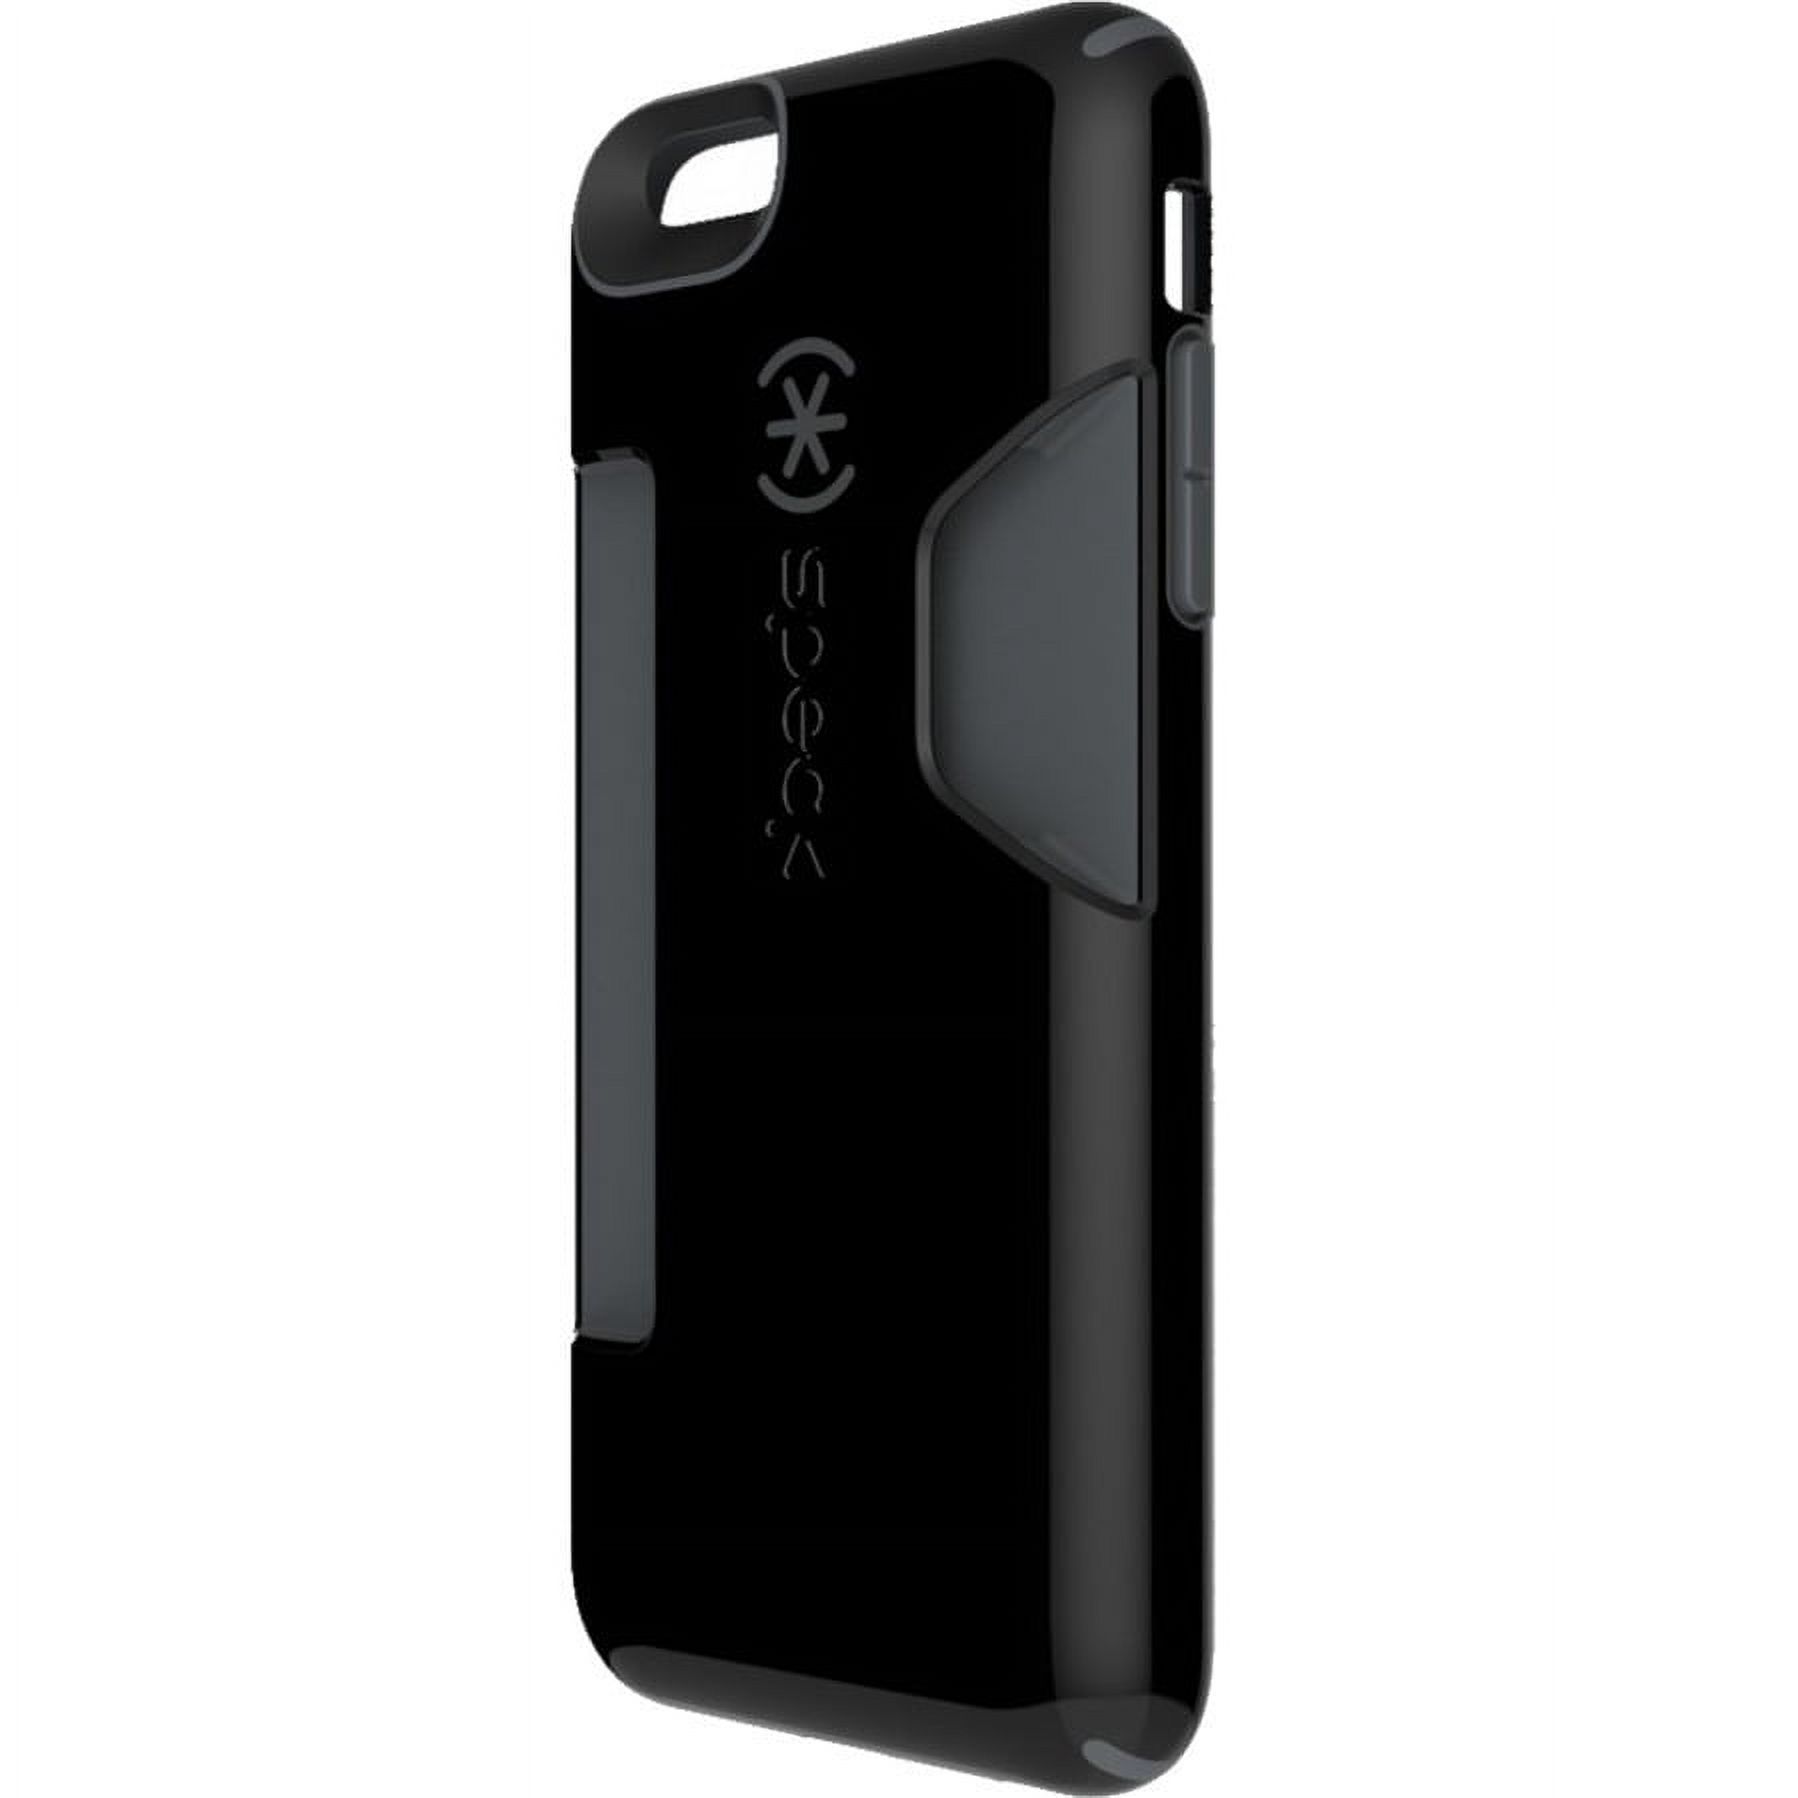 Speck CandyShell Card iPhone 6 Plus Case - image 1 of 2